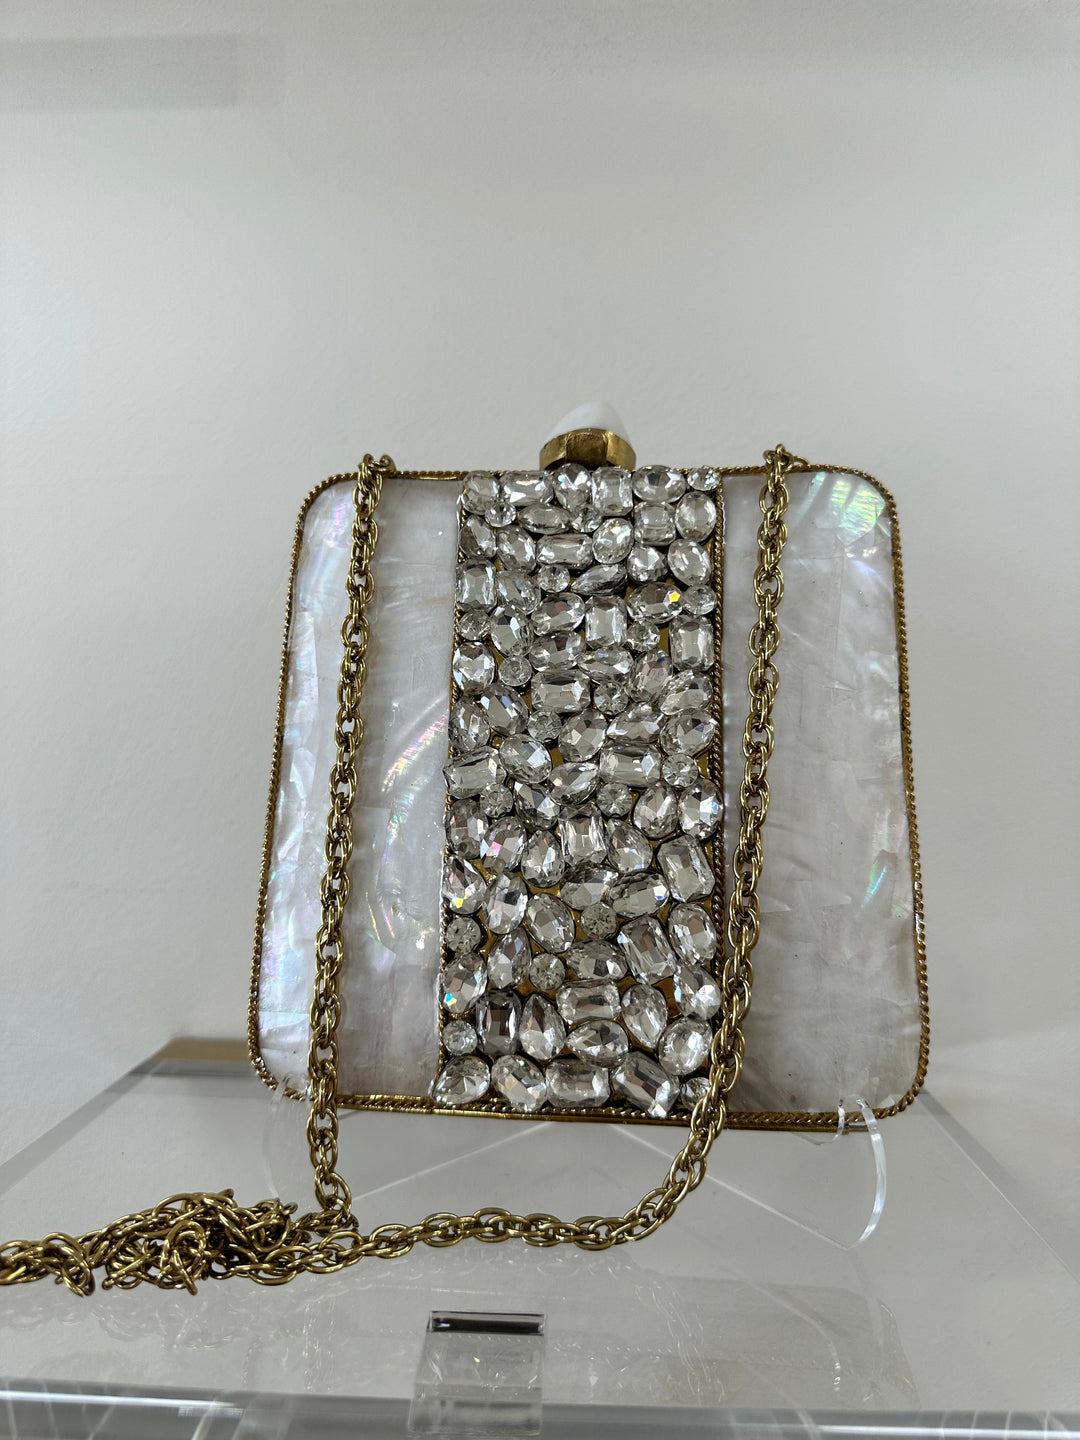 Mother of Pearl Clutch